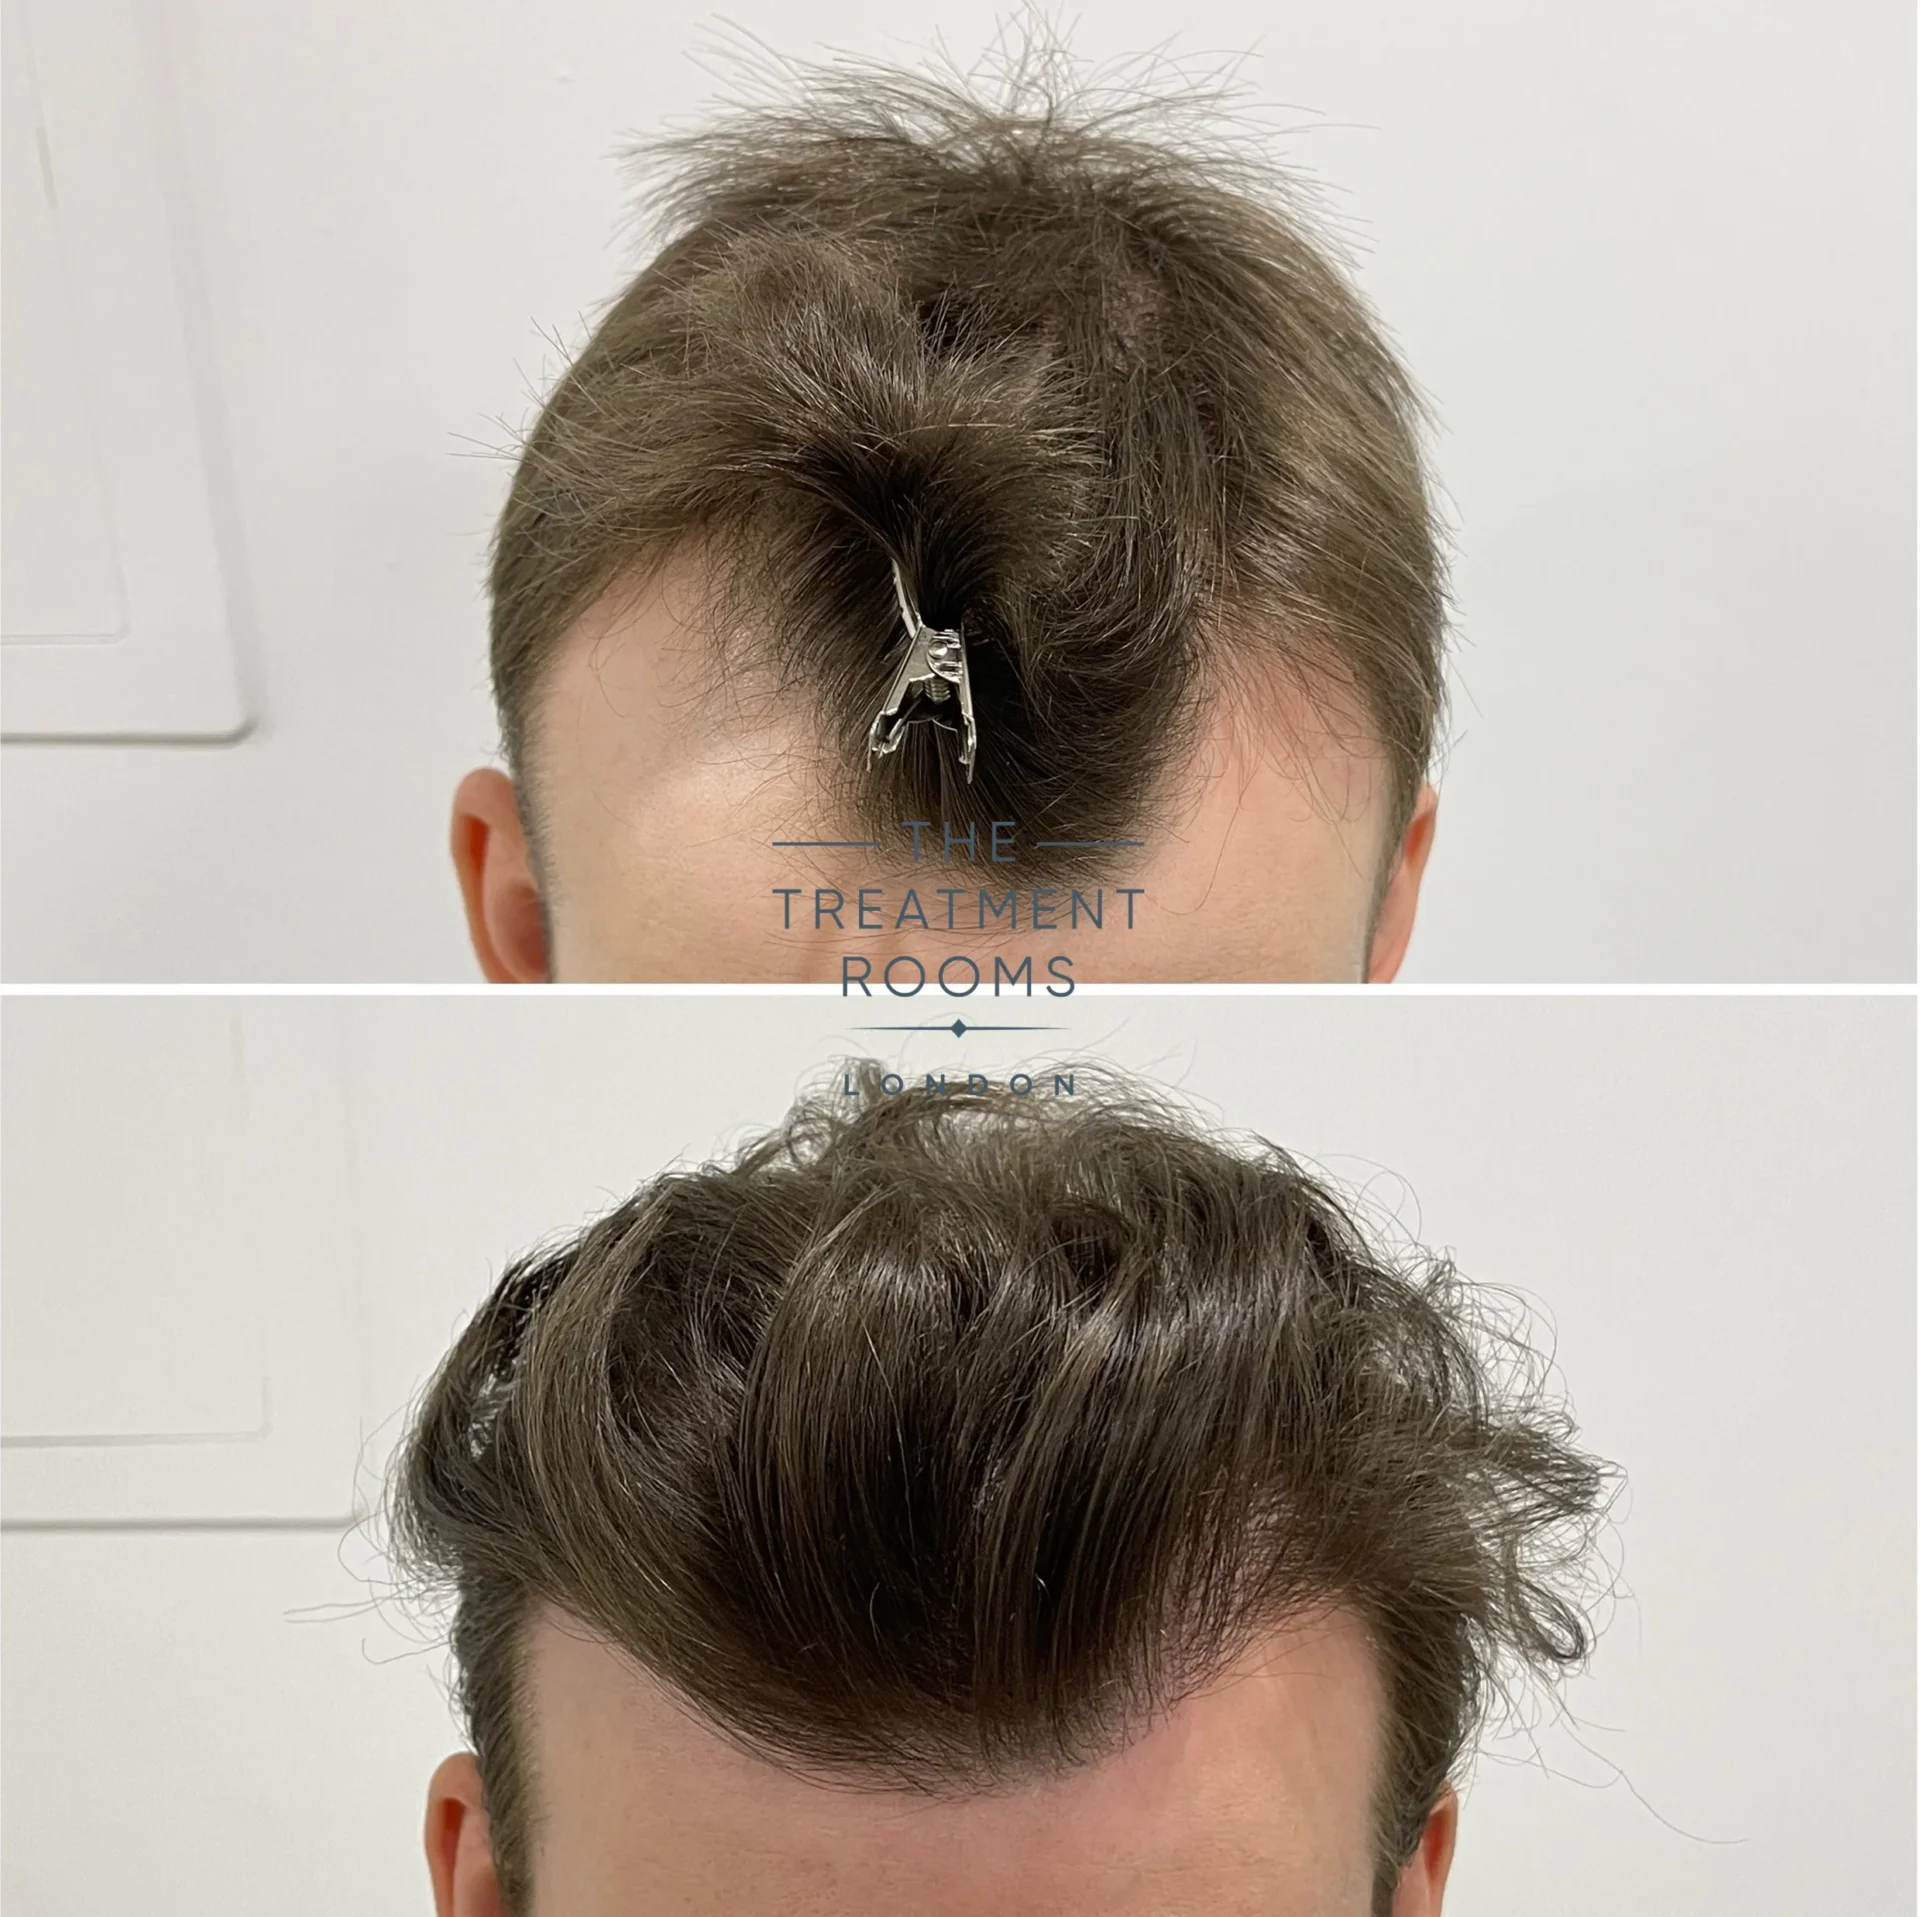 is a hair transplant painful